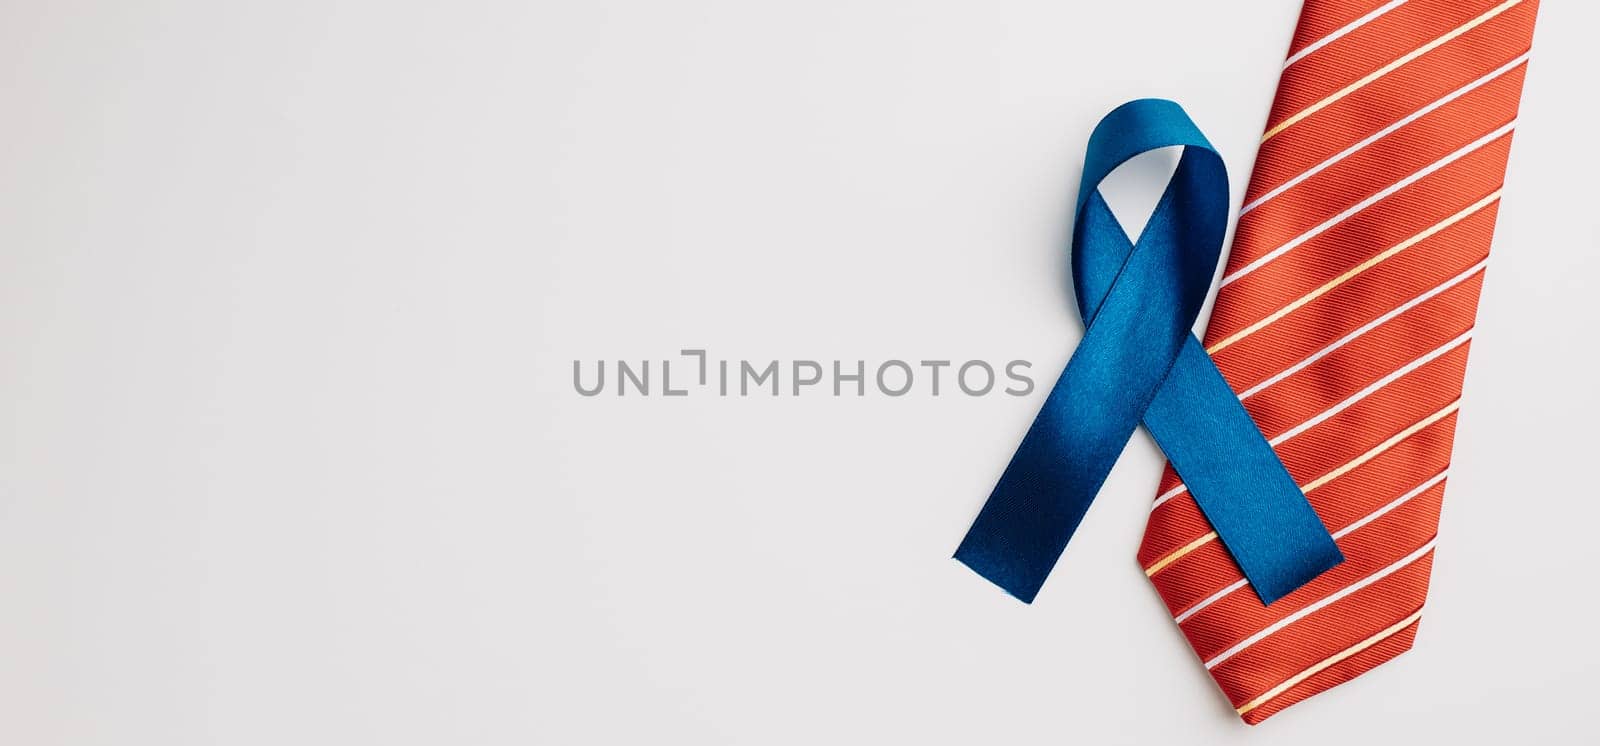 In November and September, a blue ribbon takes the spotlight, symbolizing prostate cancer and men's health awareness on a white background.